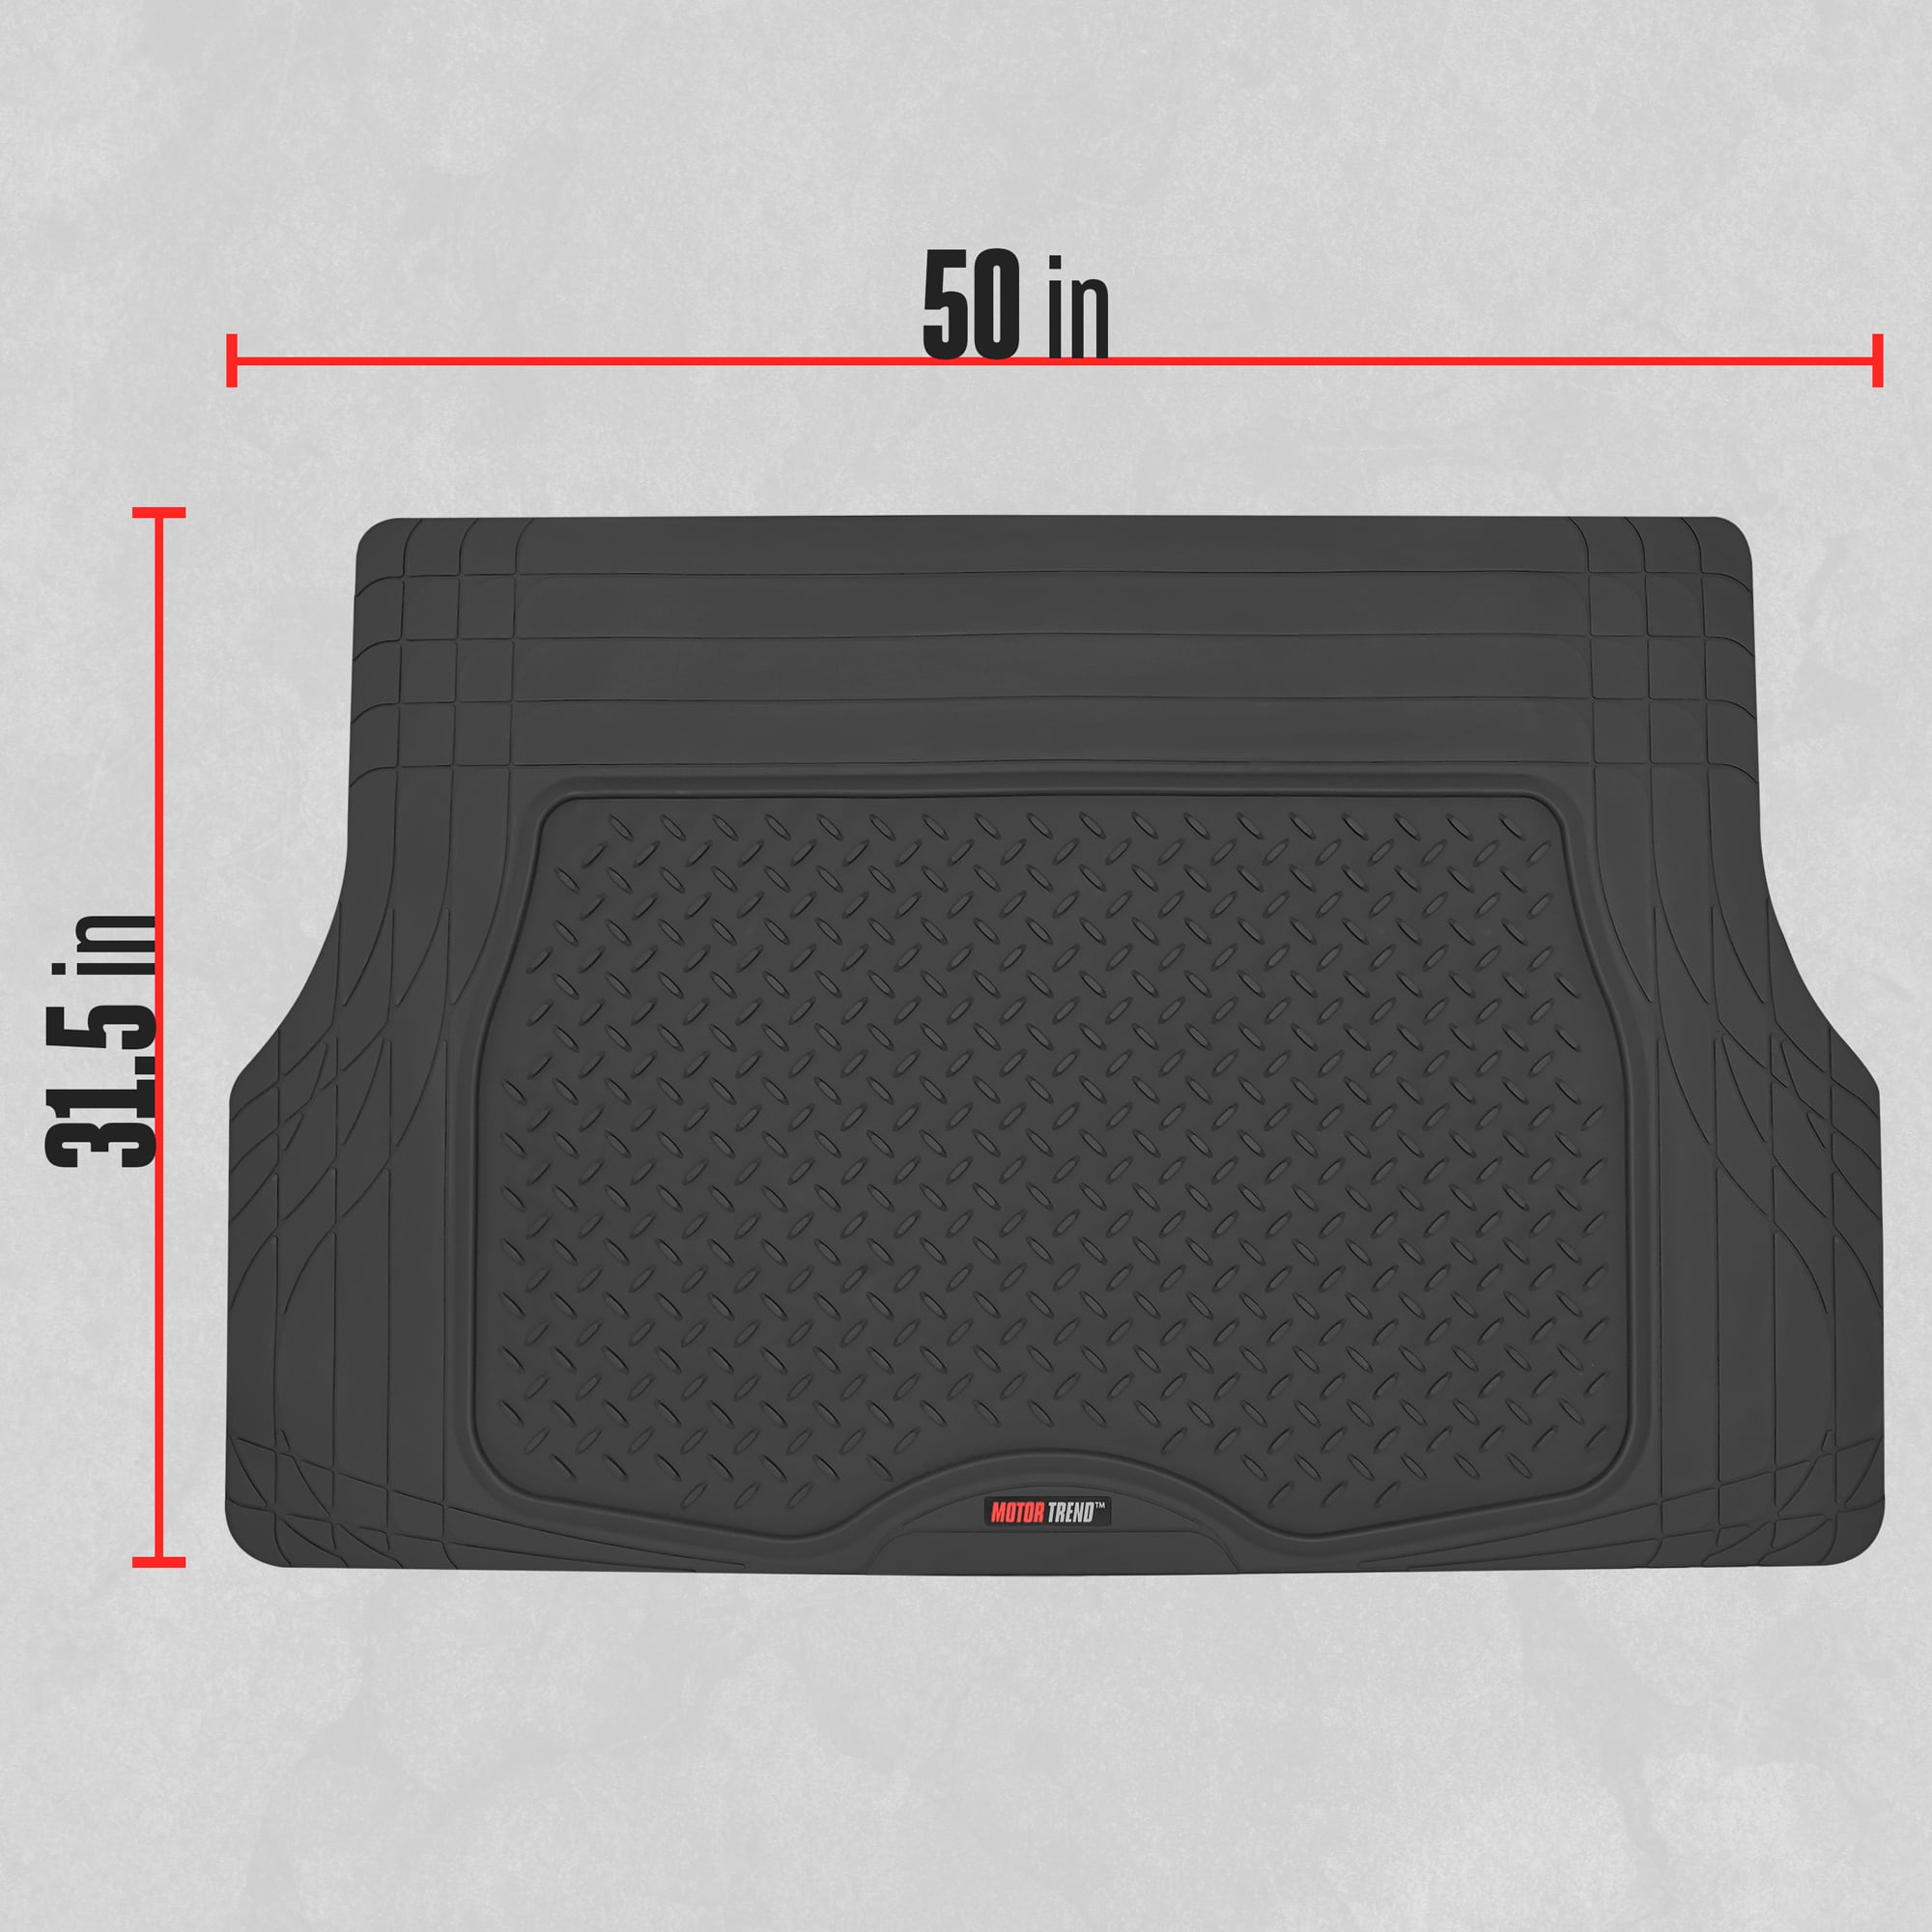 Motor Trend Heavy Duty Utility Cargo Liner Floor Mats for Truck SUV, Trimmable to Fit Trunk, All Weather Protection - Walmart.com